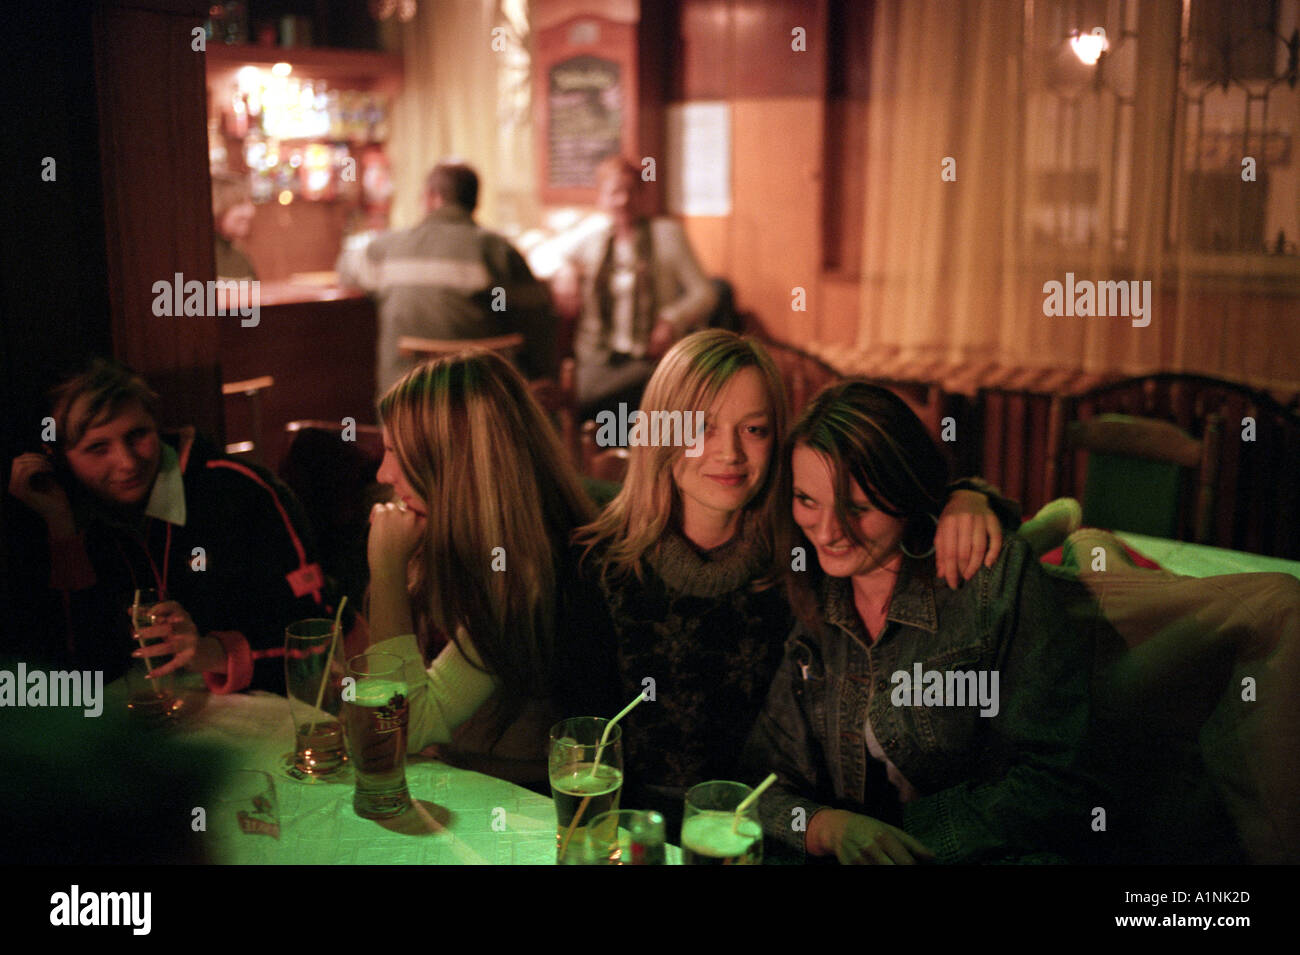 Young girls drinking in a bar in the town of Chelm Chelm is the nearest town to Polands border with the Ukraine Stock Photo